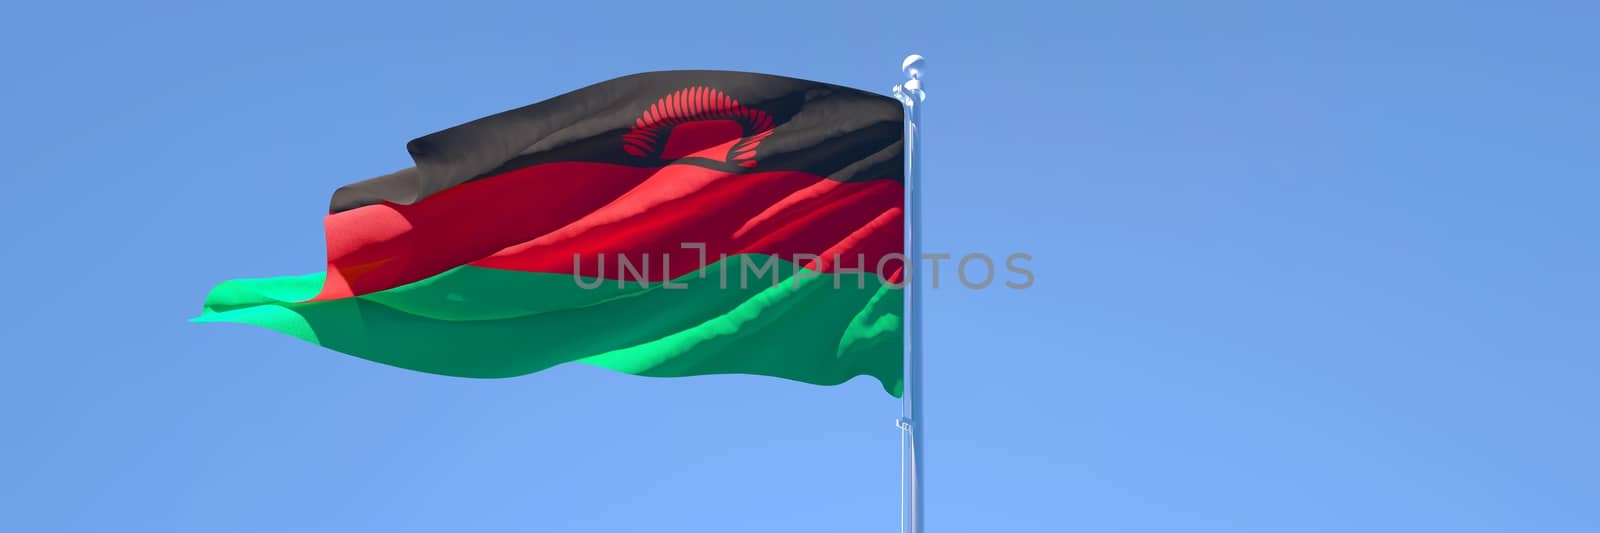 3D rendering of the national flag of Malawi waving in the wind against a blue sky